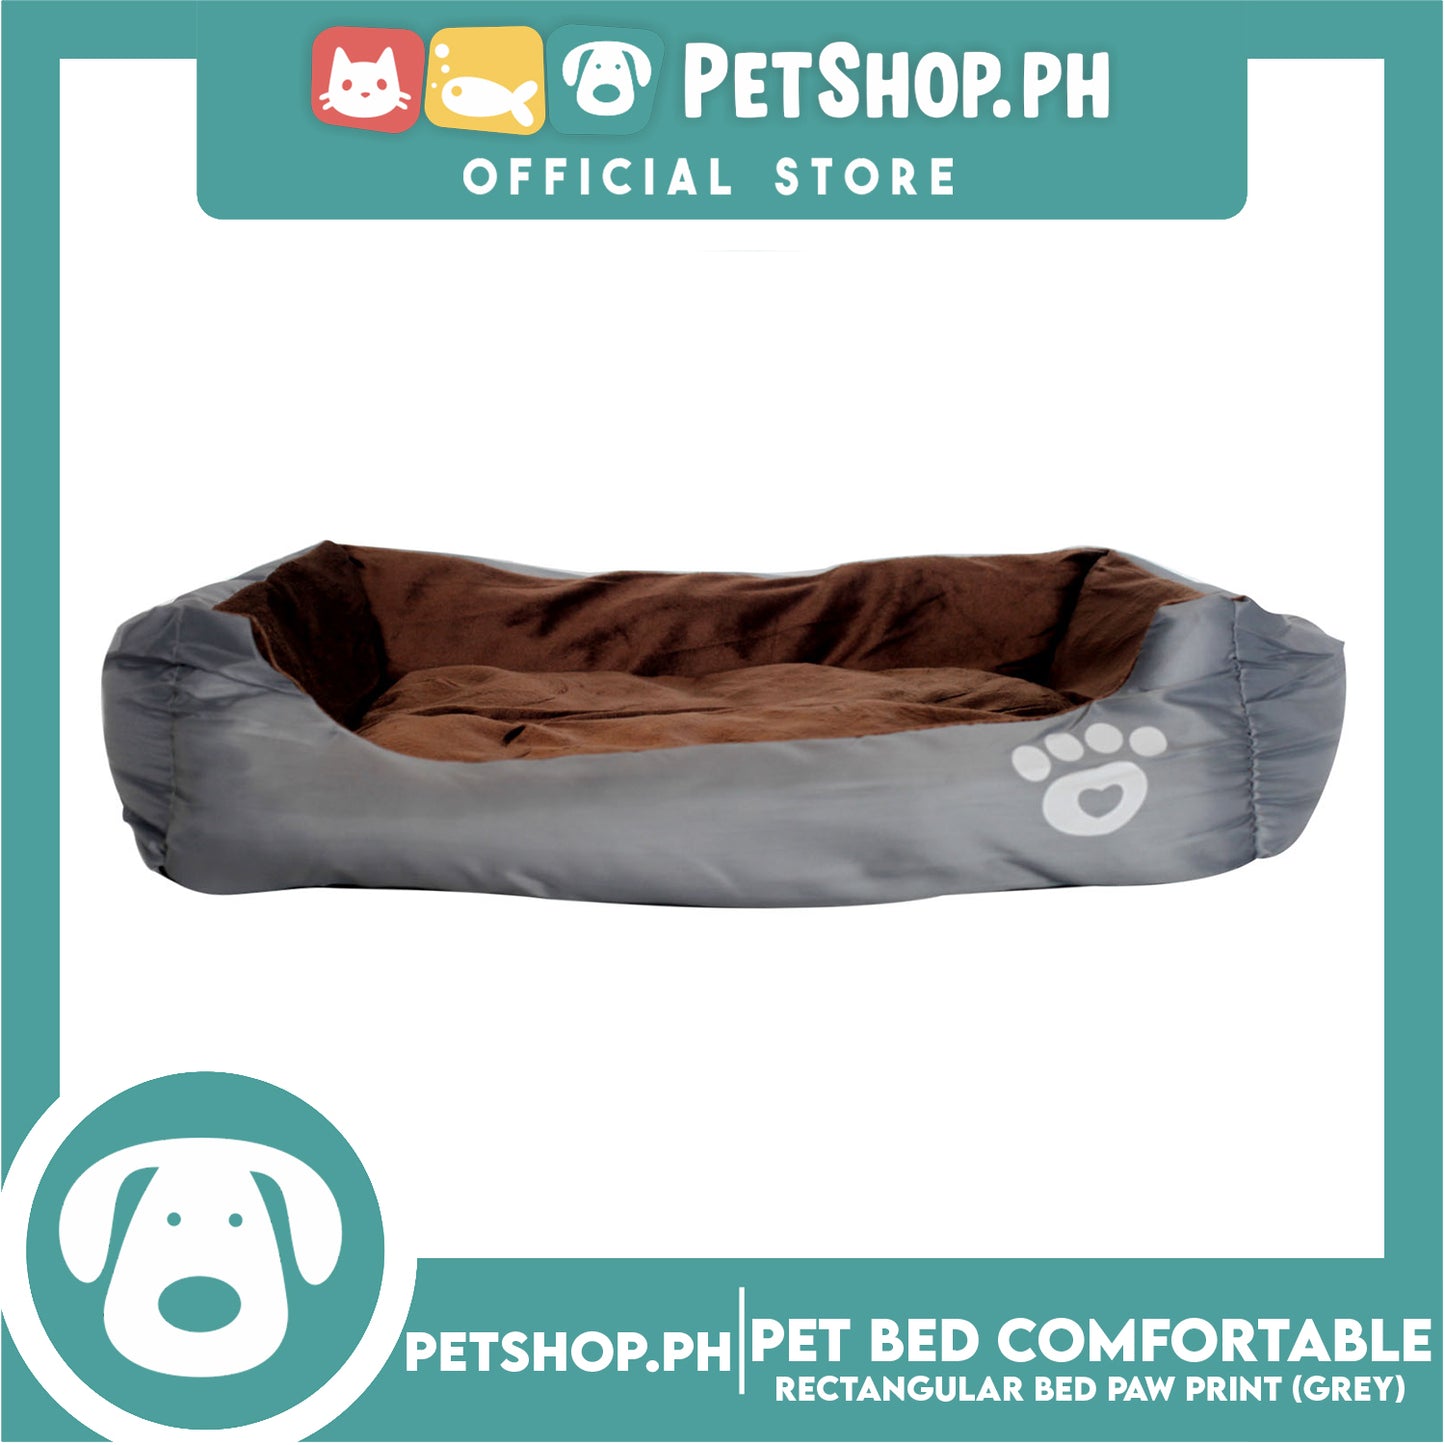 Pet Bed Comfortable Rectangular Pet Bed with Paw Print 62x50x12cm Medium for Dogs & Cats (Gray)